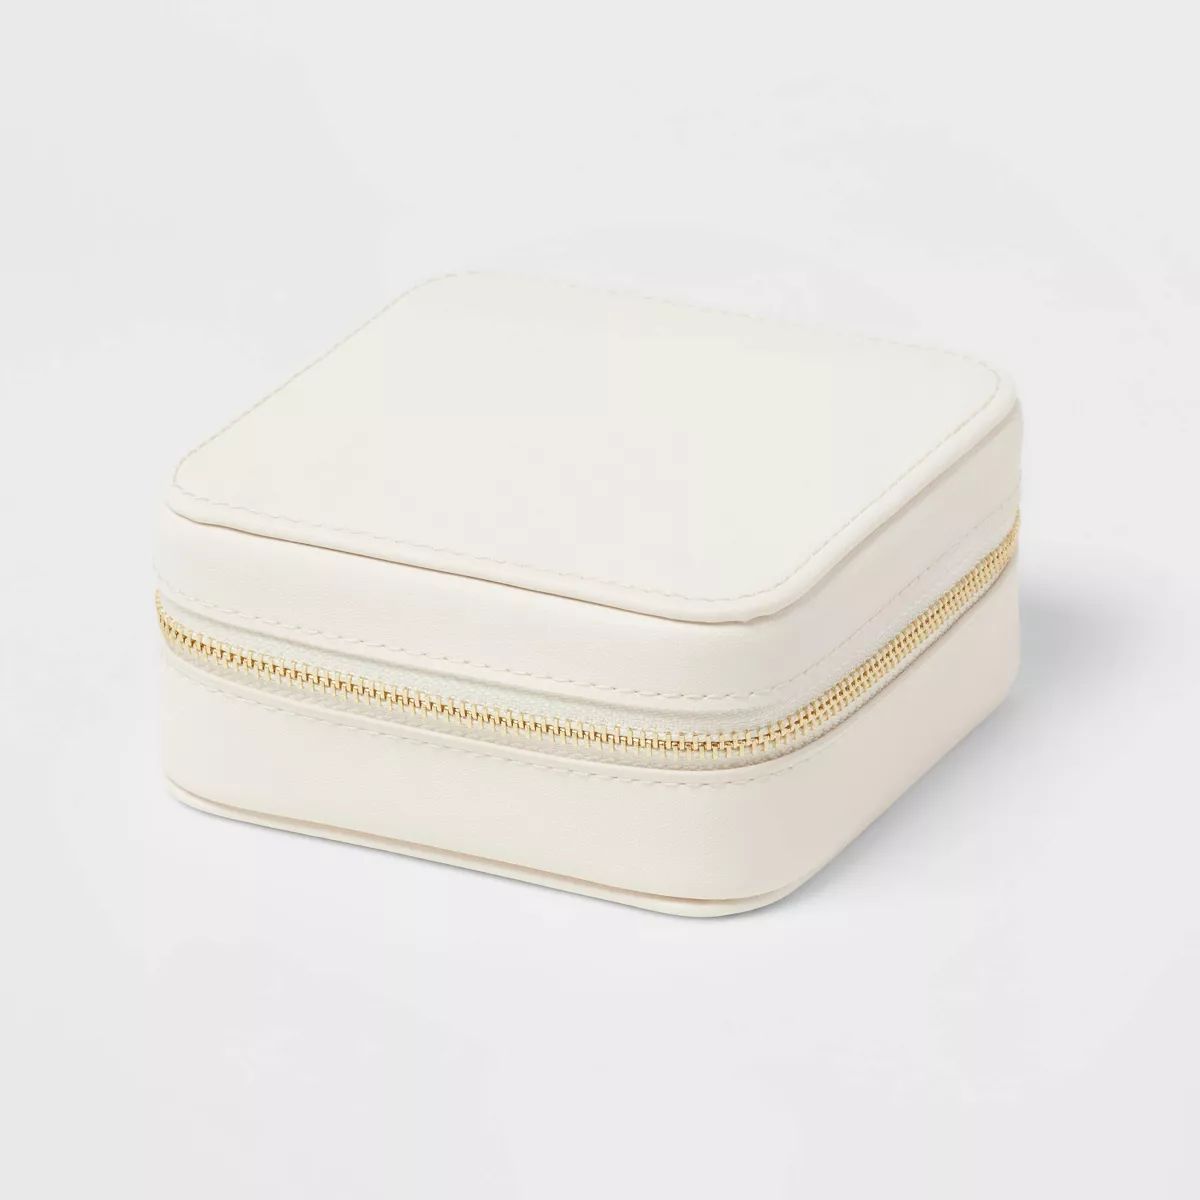 Small Travel Accessory Organizer Off-White - Brightroom™ | Target